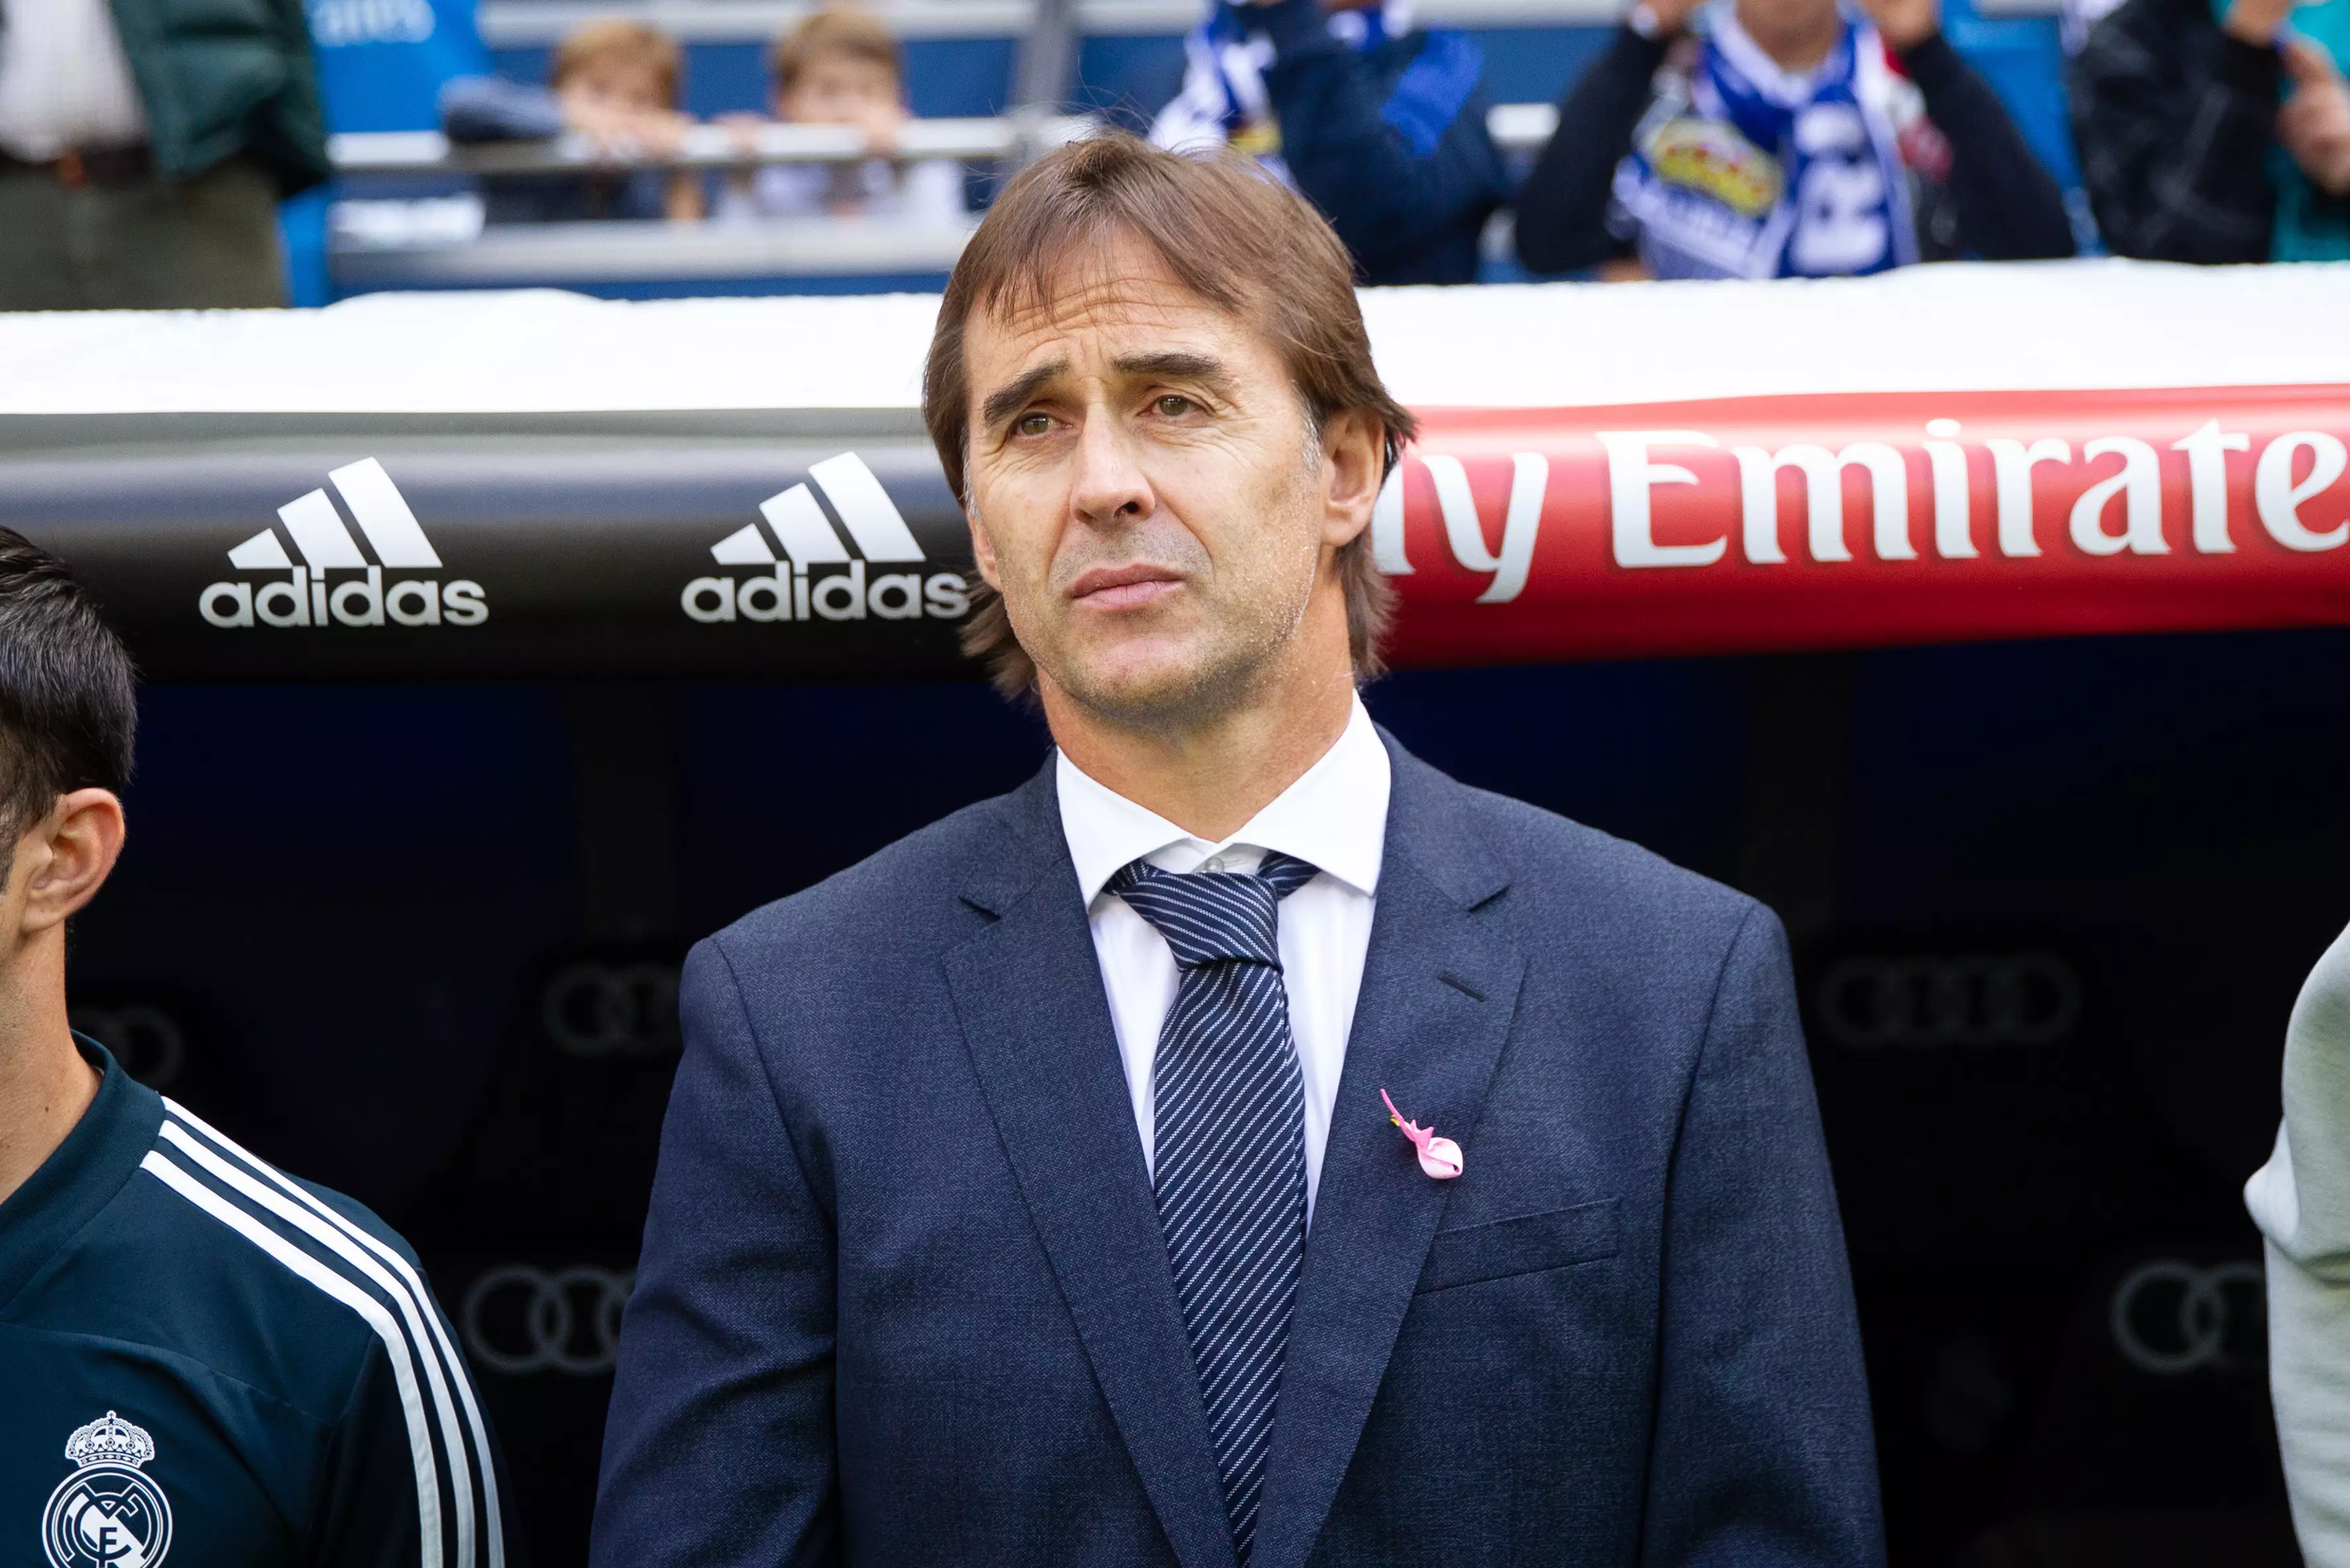 Lopetegui has not had a happy time in the Spanish capital so far. Image: PA Images